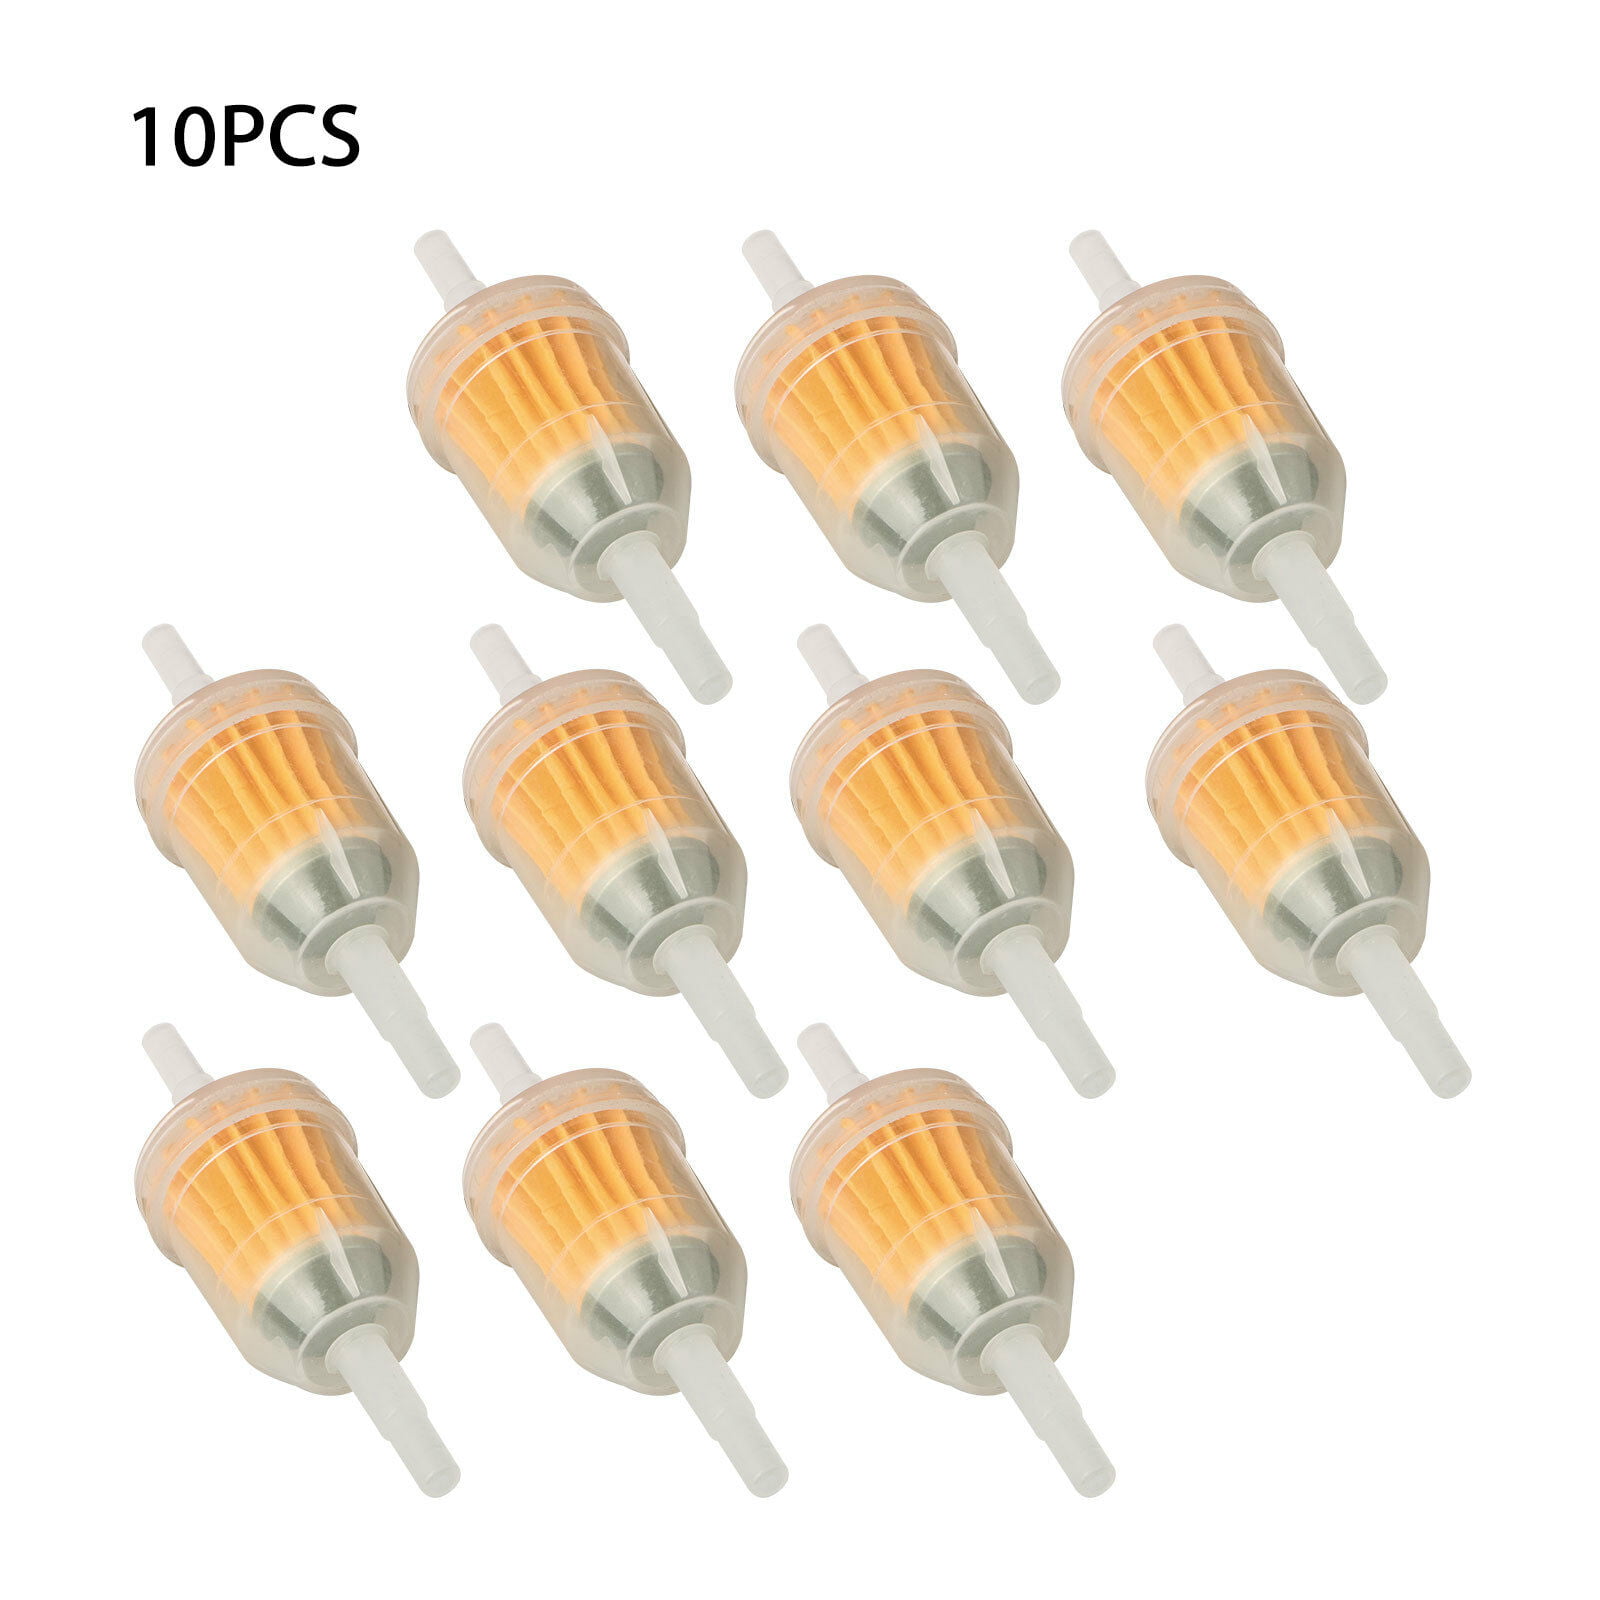 10Pcs 1/4" 6mm/8mm Inline Gas Fuel Filter For Small Engine Lawn Mower  ATAUPLMN 